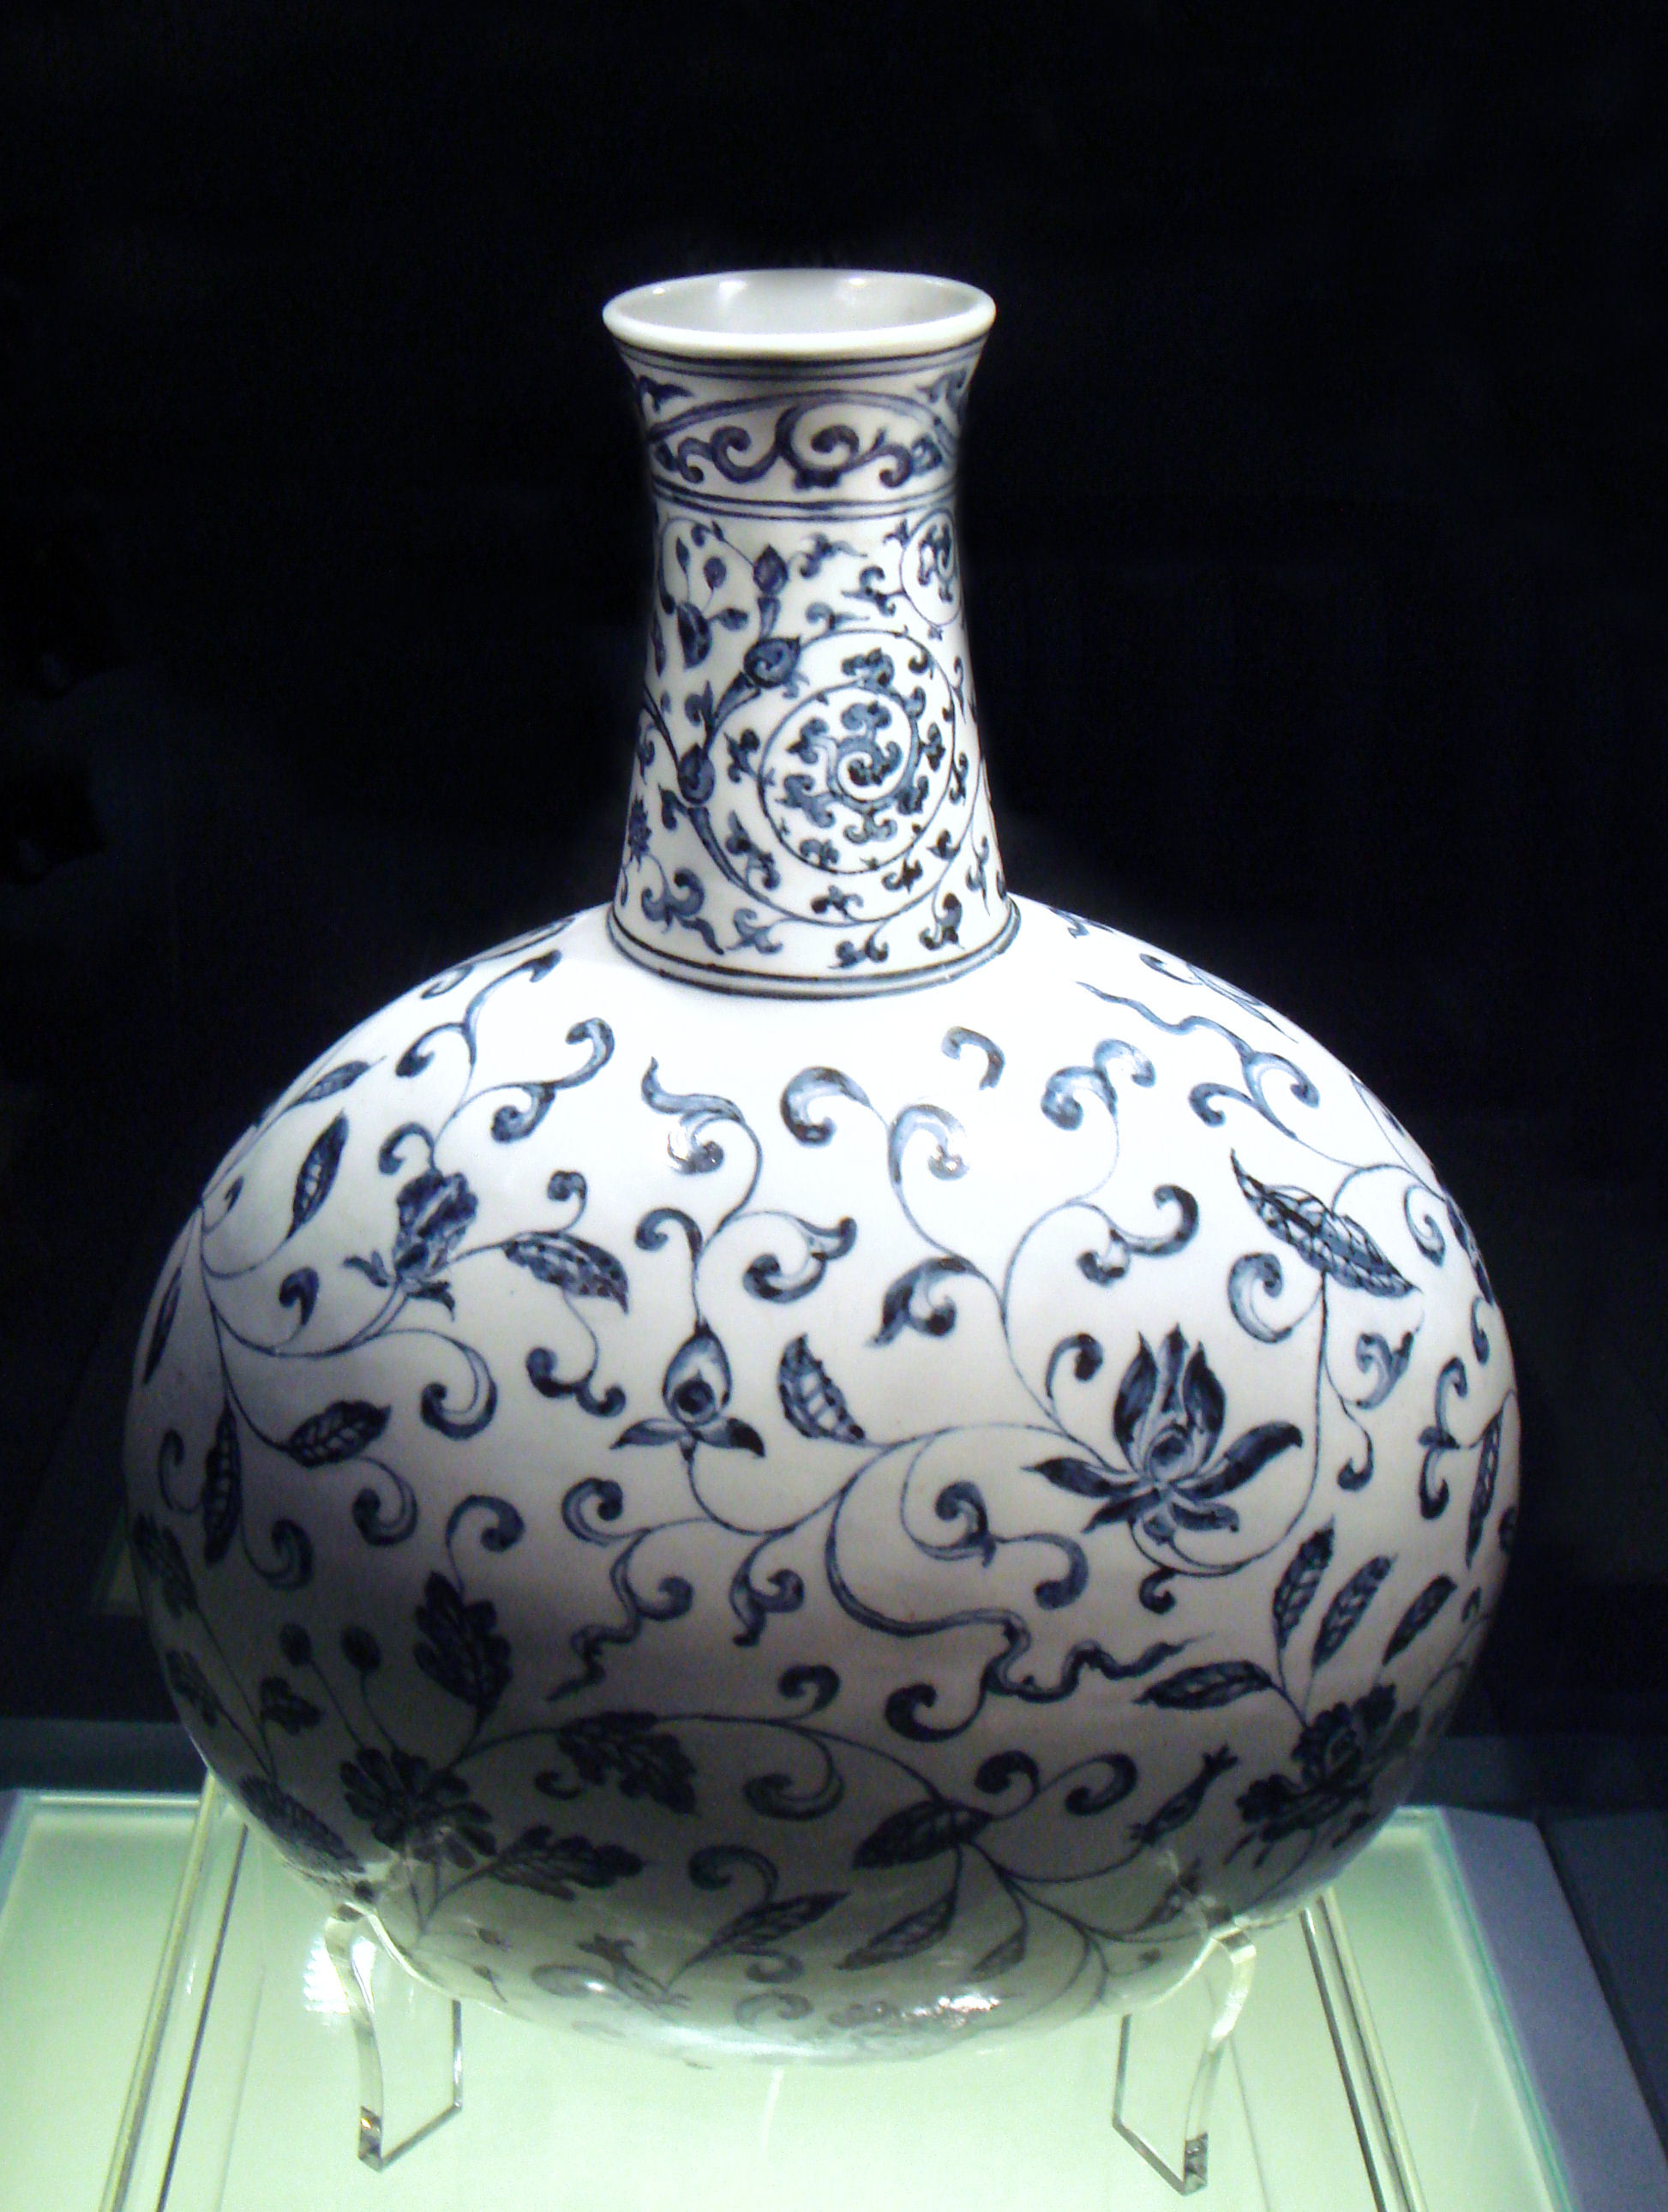 https://static.wikia.nocookie.net/ceramica/images/4/4f/Blue_and_white_vase_Jingdezhen_Ming_Yongle_1403_1424.jpg/revision/latest/scale-to-width-down/1946?cb=20120511050040